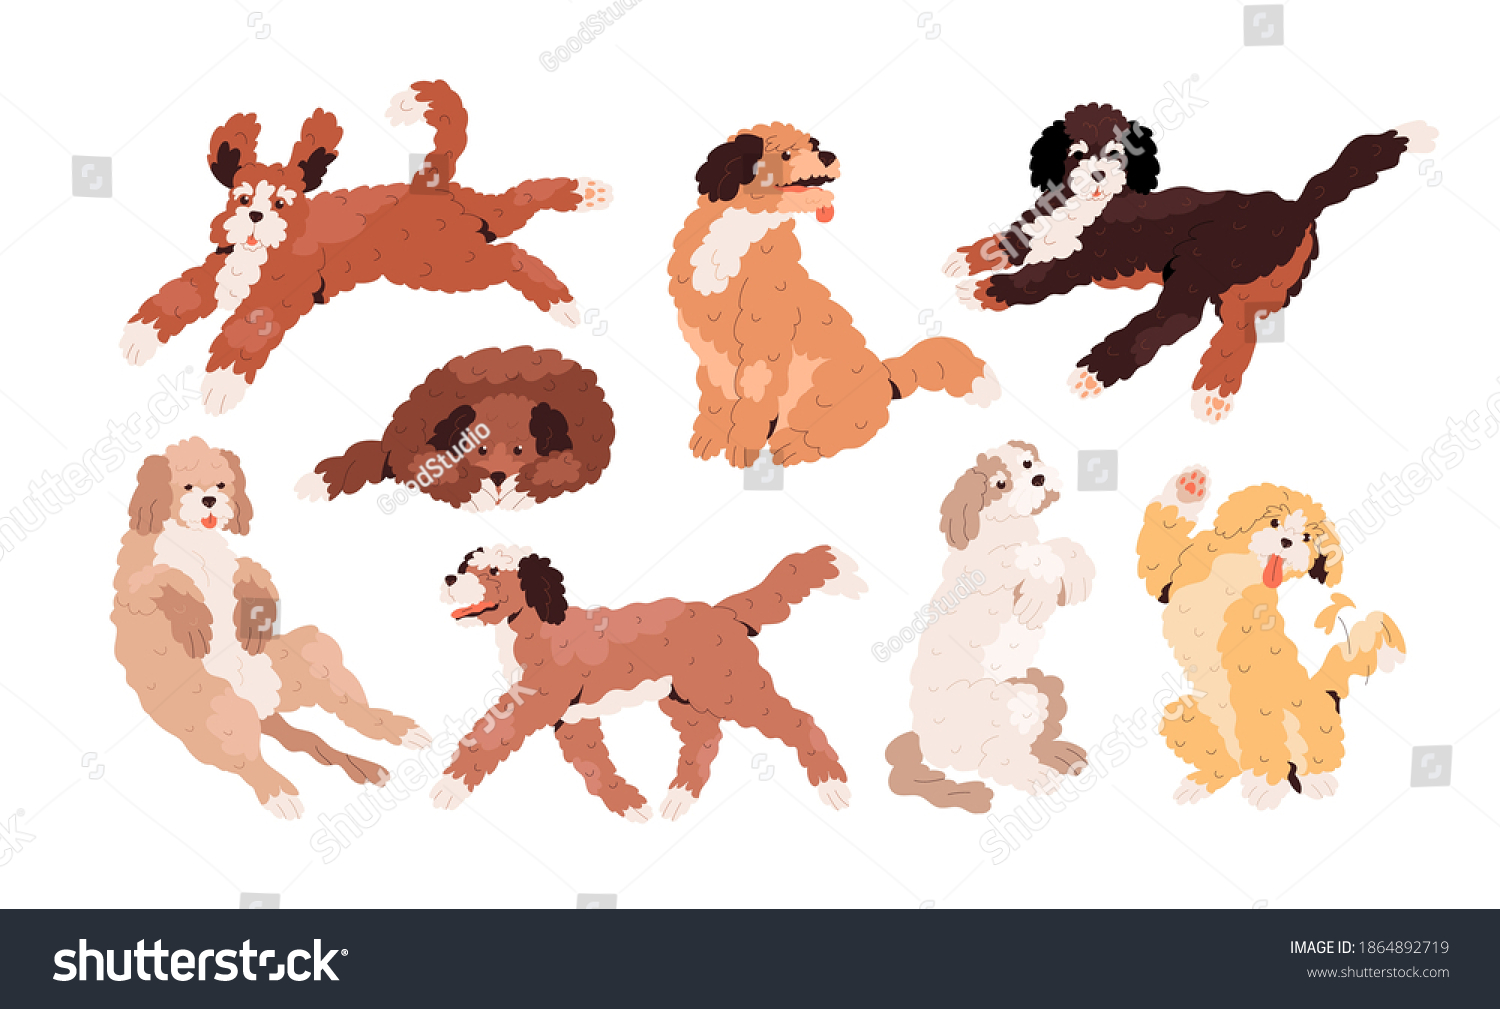 SVG of Set of cute playful Goldendoodles and Labradoodles. Golden, tan and white curly-haired dogs running, jumping, sitting and waving with paw. Colored flat vector illustration isolated on white background svg